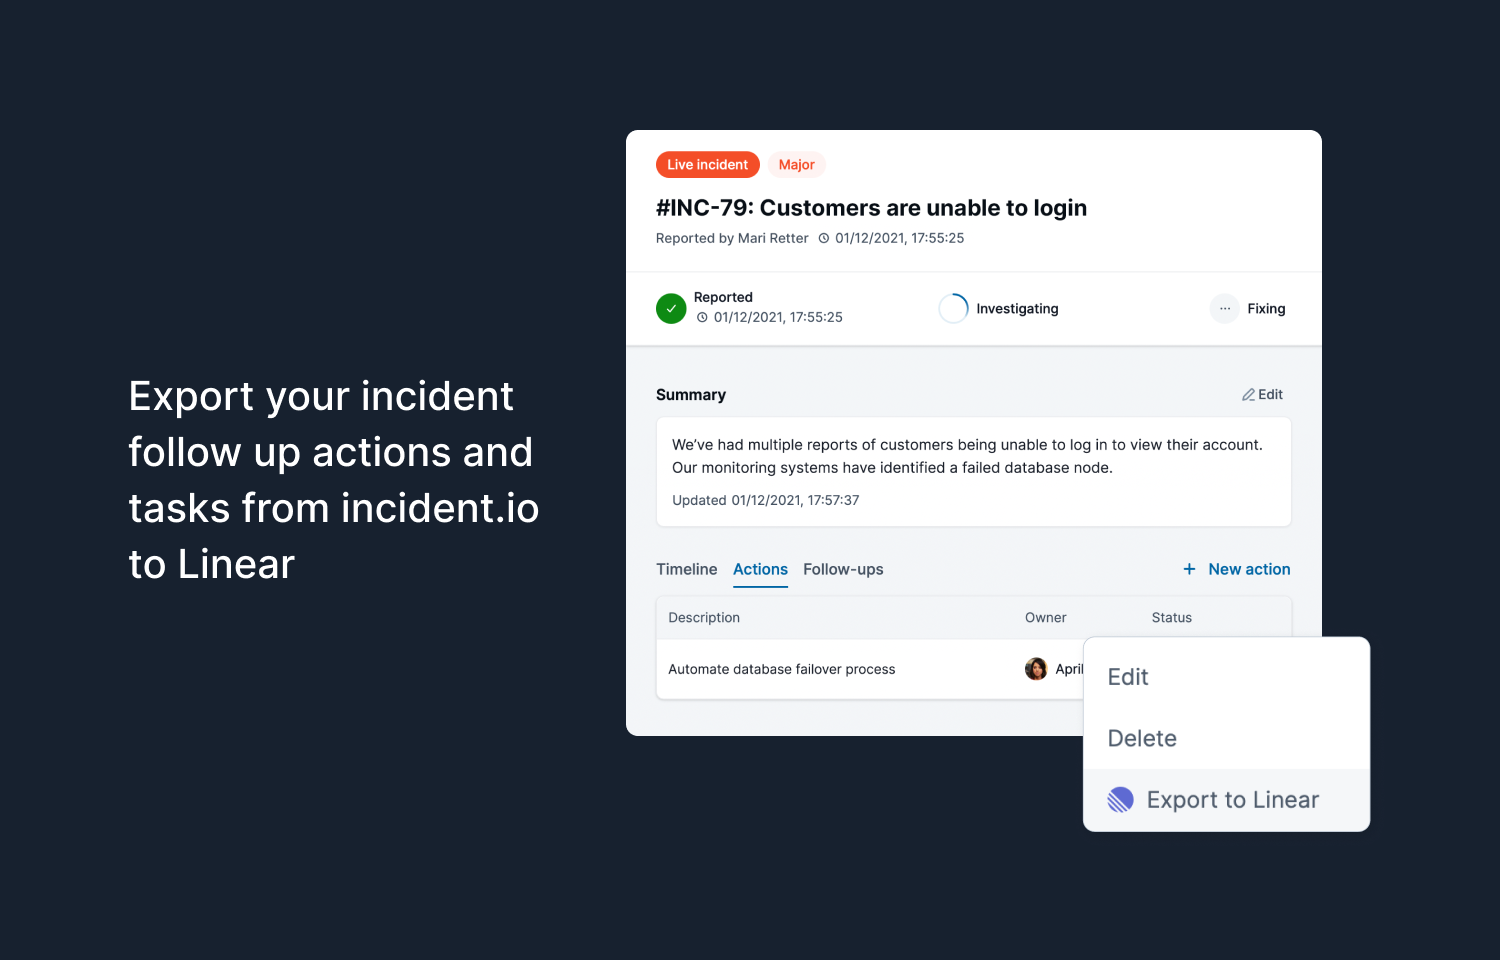 Export your incident follow up actions and tasks from incident.io to Linear